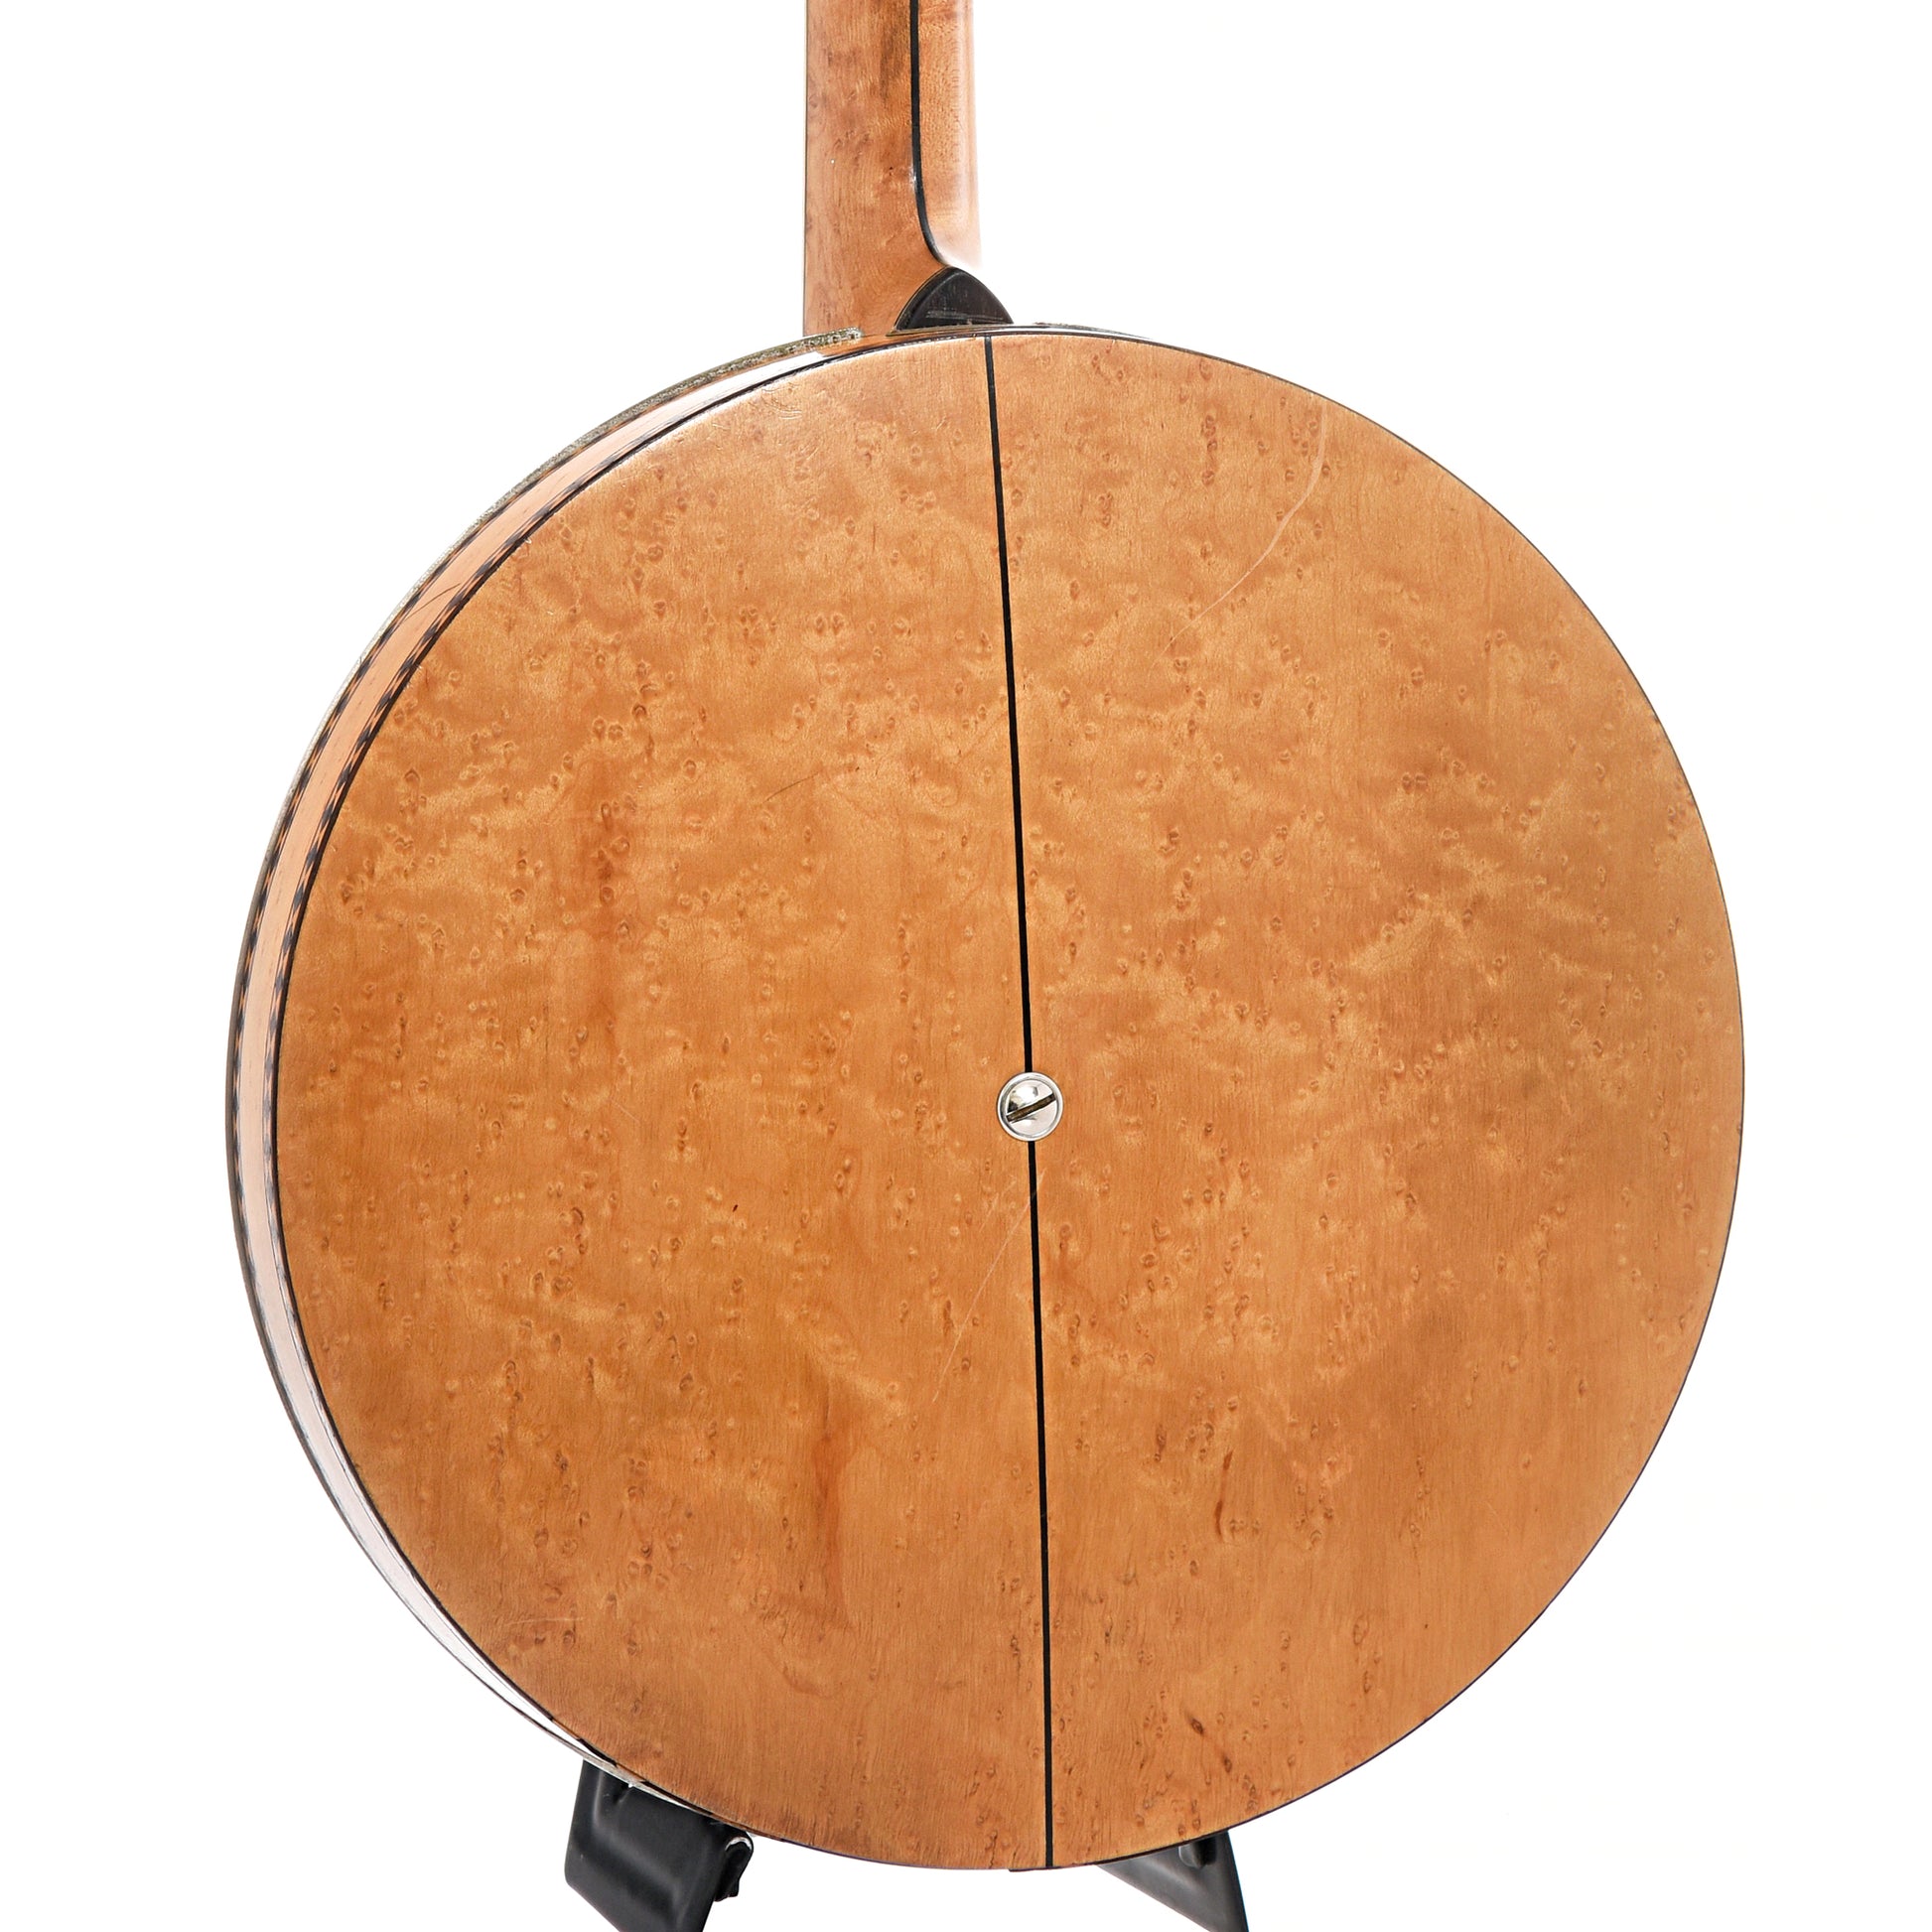 Back and side of Washburn Style 5179 Classic Tenor Banjo 